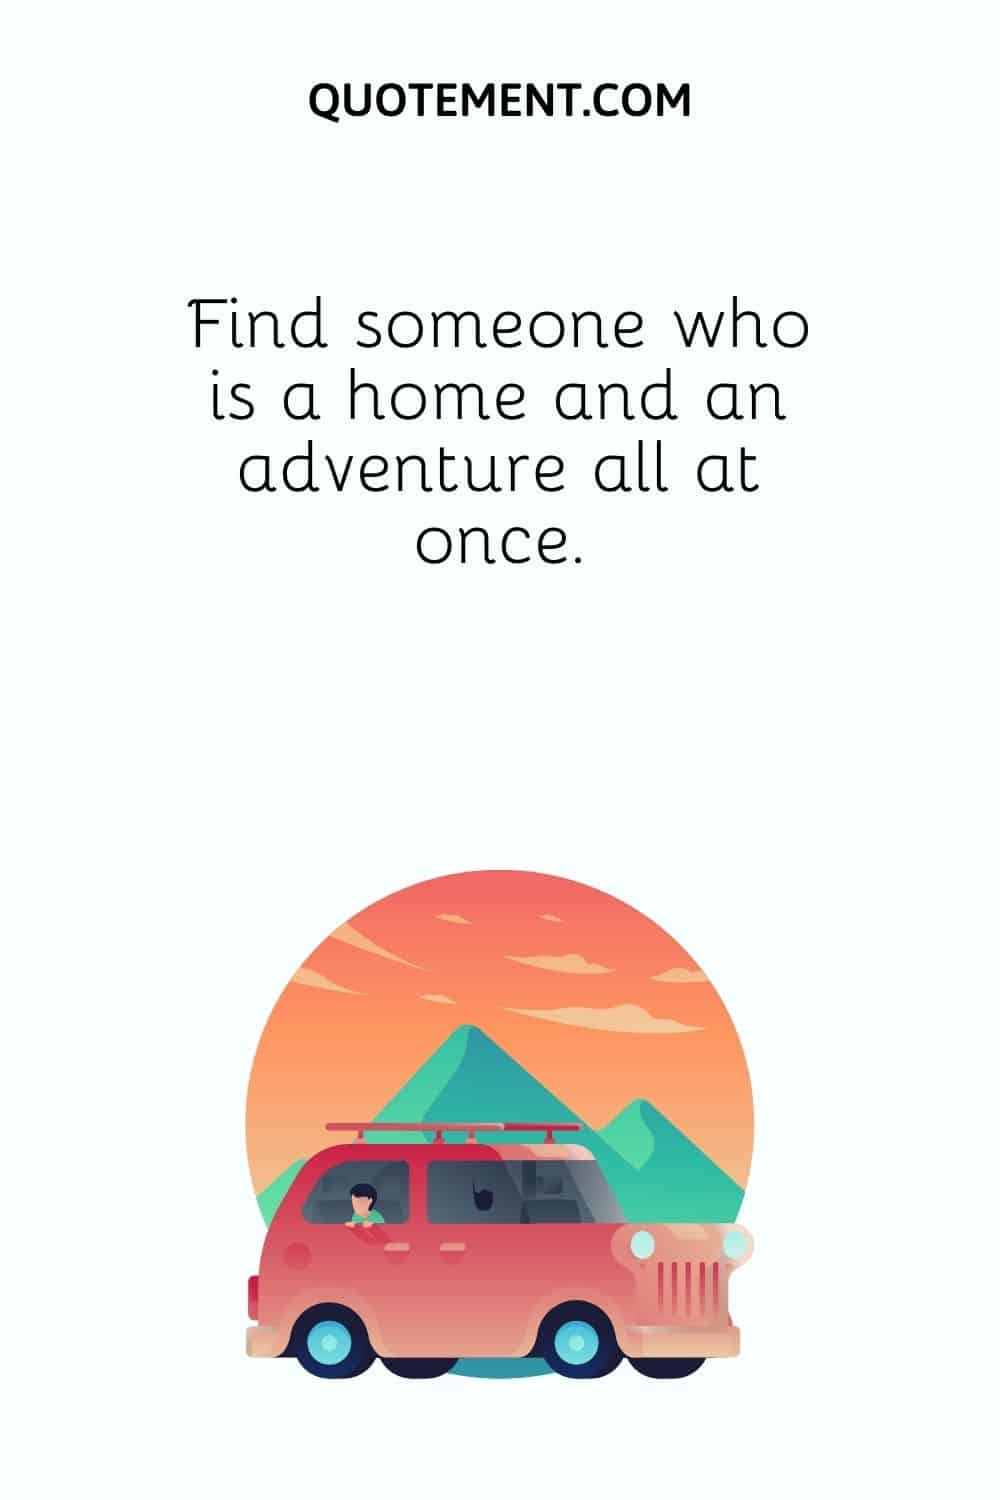 Find someone who is a home and an adventure all at once.